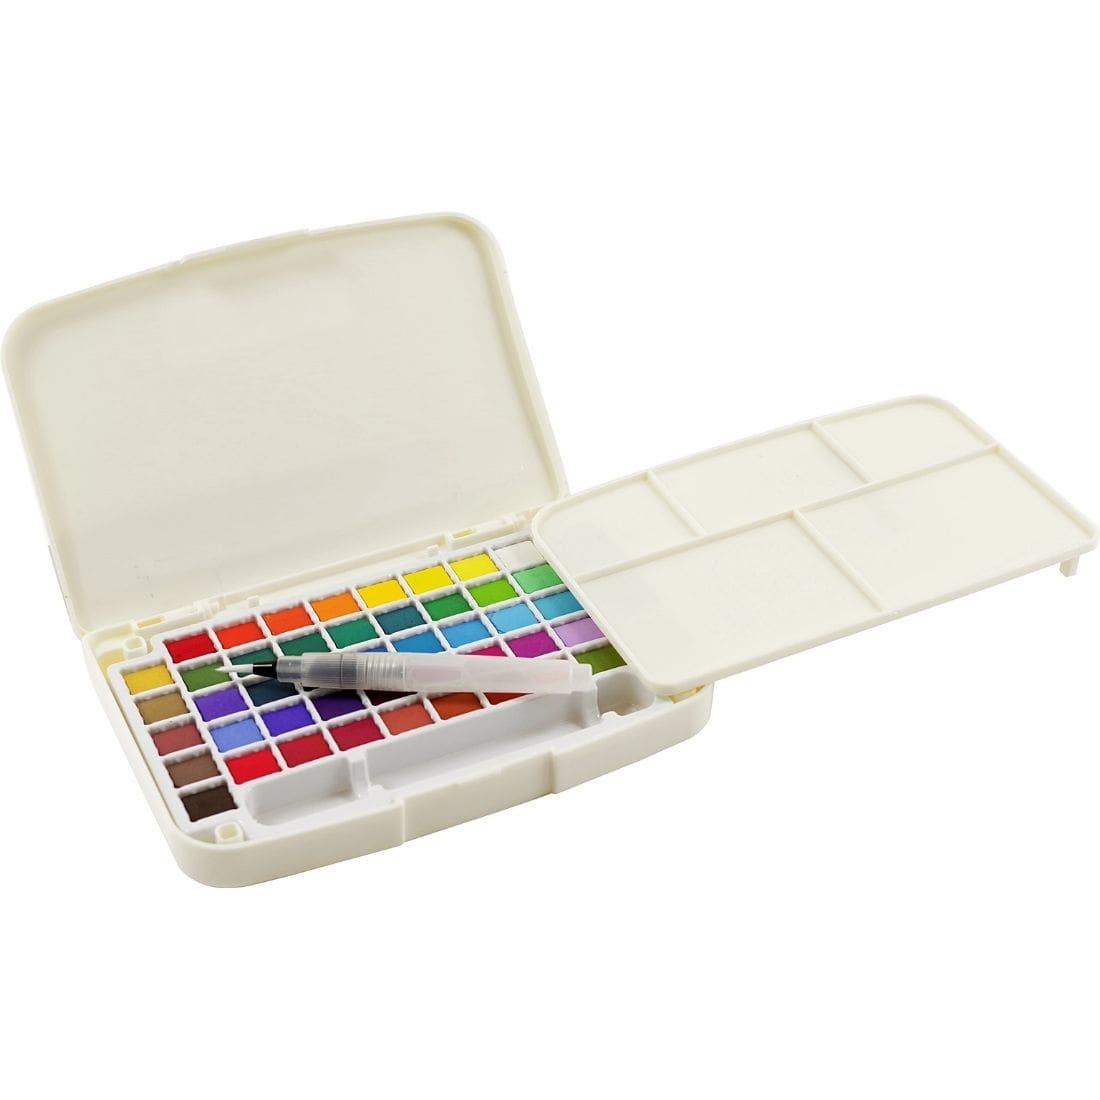 Peter Pauper Press watercolour pocket set with a water brush and mixing palette - Paper Kooka